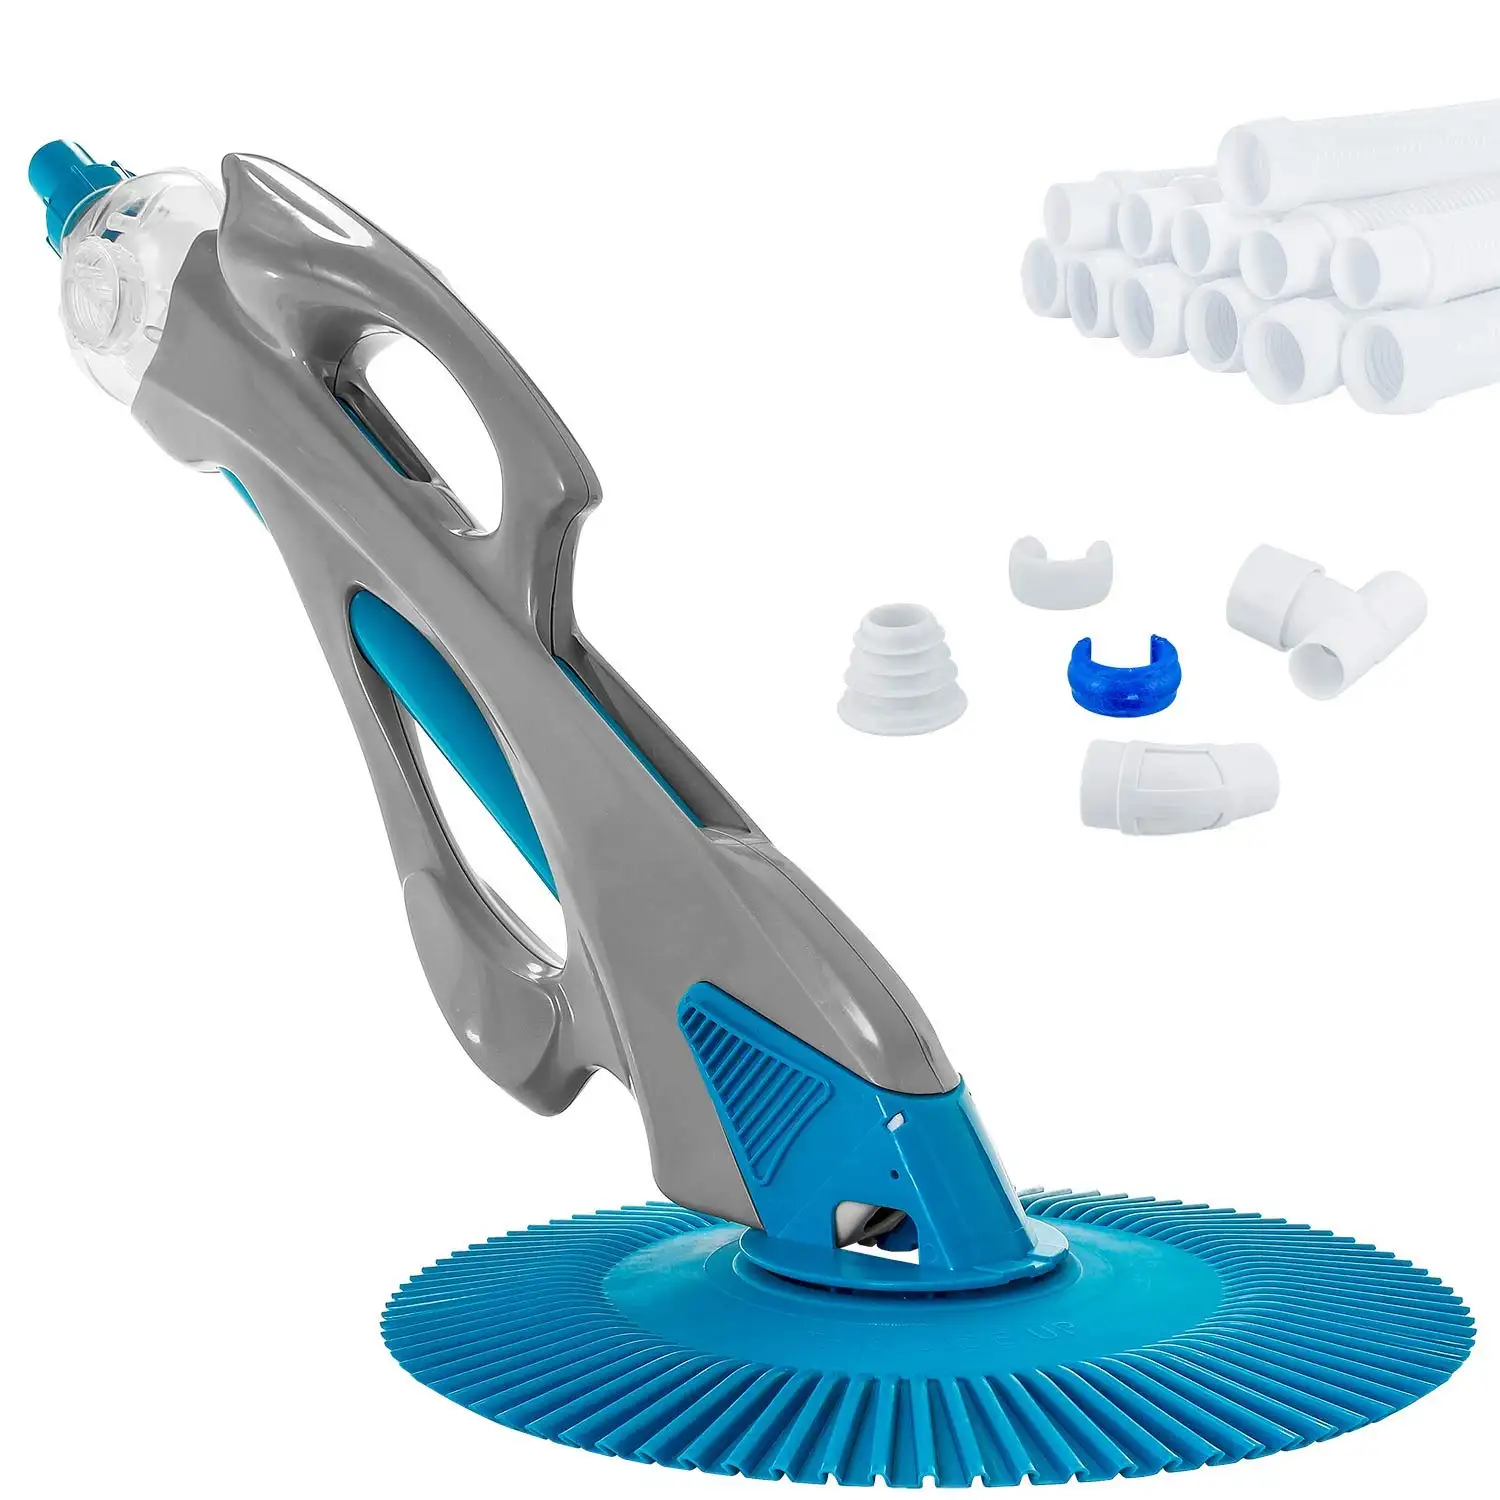 Handheld Auto High Quality Wholesale In/Above Automatic Swimming Pool Cleaning Equipment Vacuum Cleaner With 10M Hose